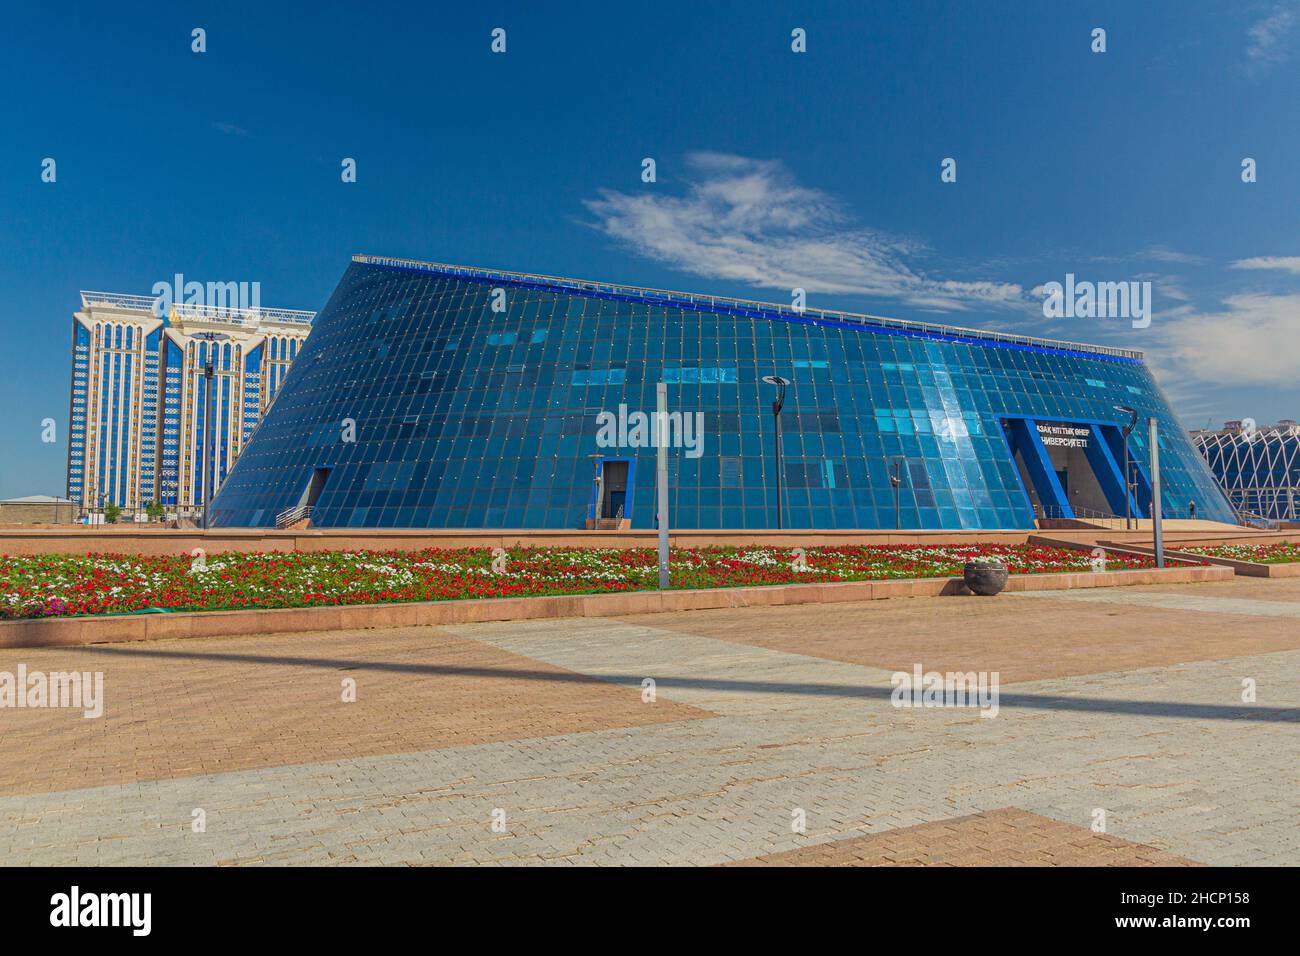 ASTANA, KAZAKHSTAN - JULY 9, 2018: Shabyt Palace of Creativity on the Independence Square in Astana now Nur-Sultan , capital of Kazakhstan. Stock Photo